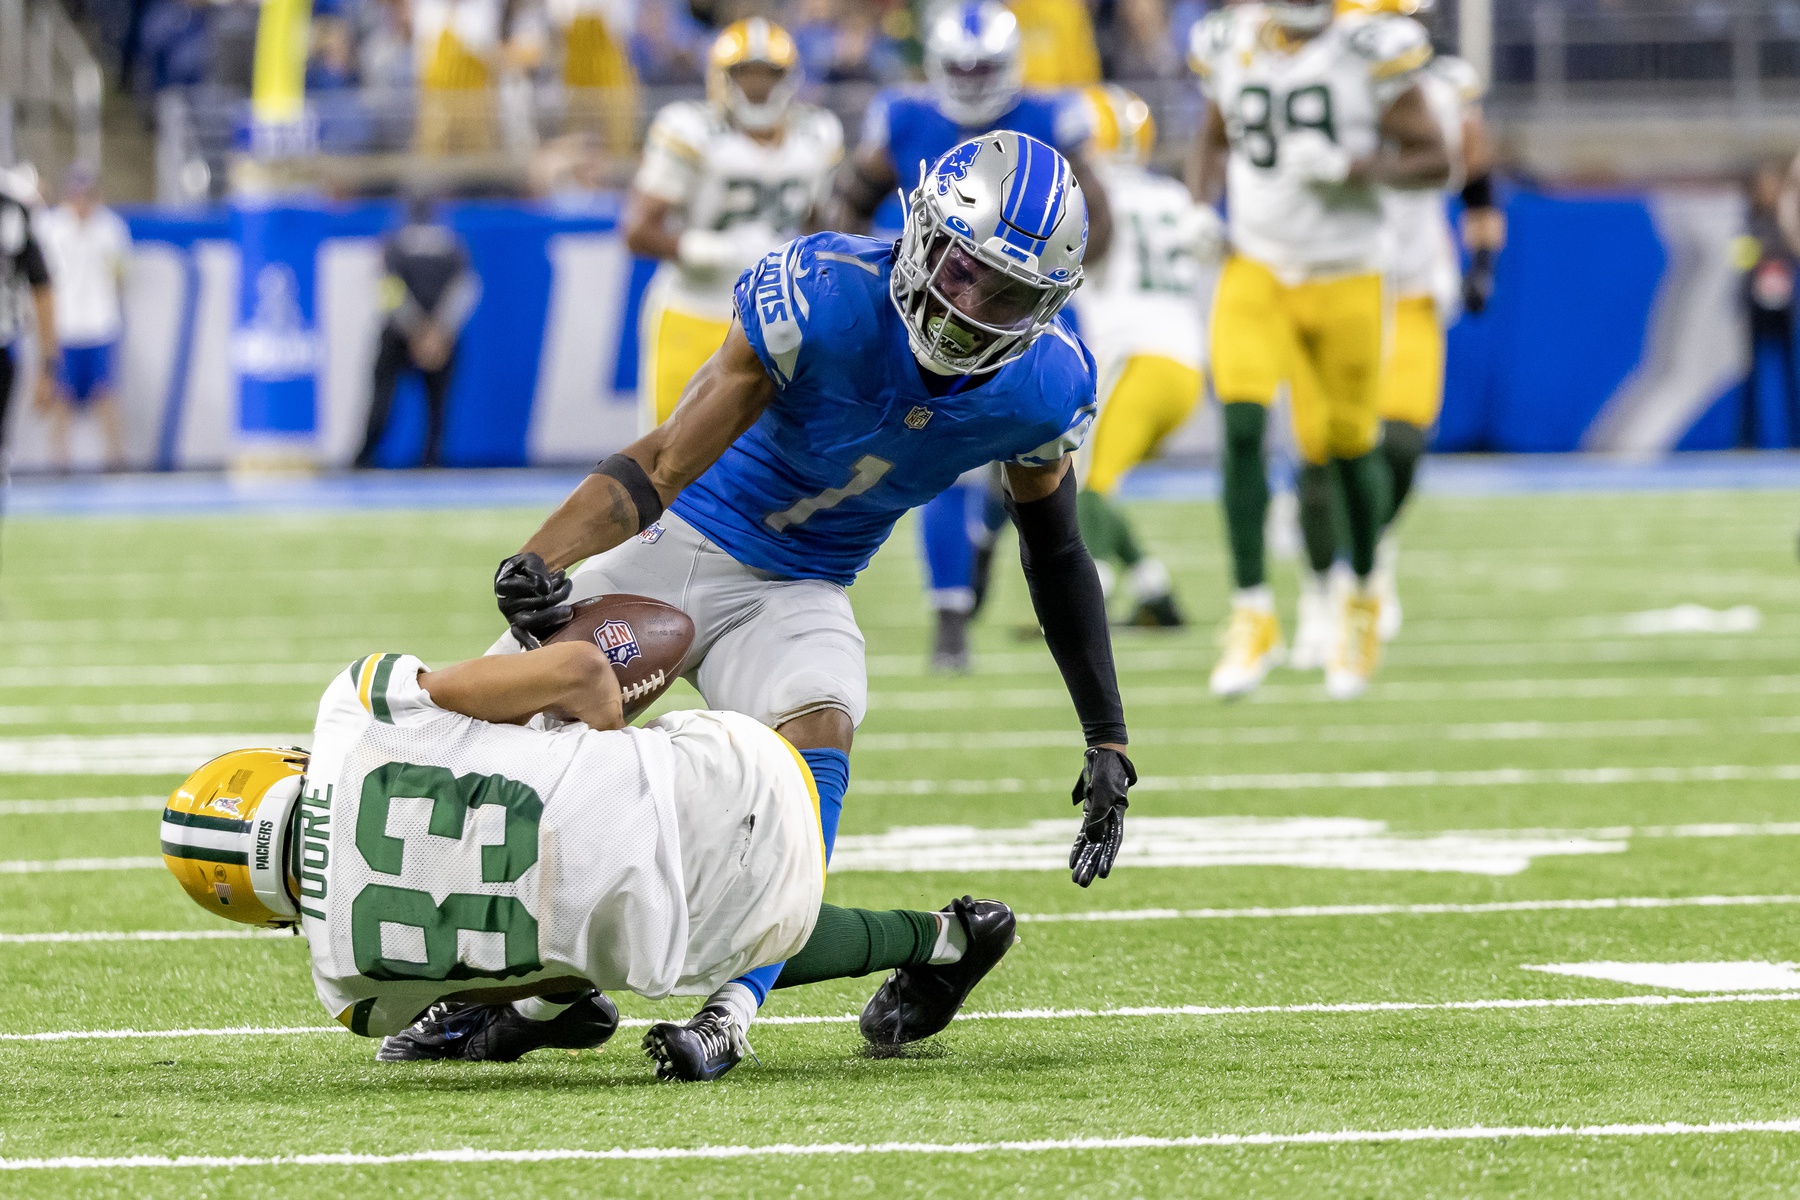 Lions-Packers Scores 13.4 Million Viewers on ESPN – Monday Night Football's  Second-Best Audience of the 2019 NFL Season - ESPN Press Room U.S.